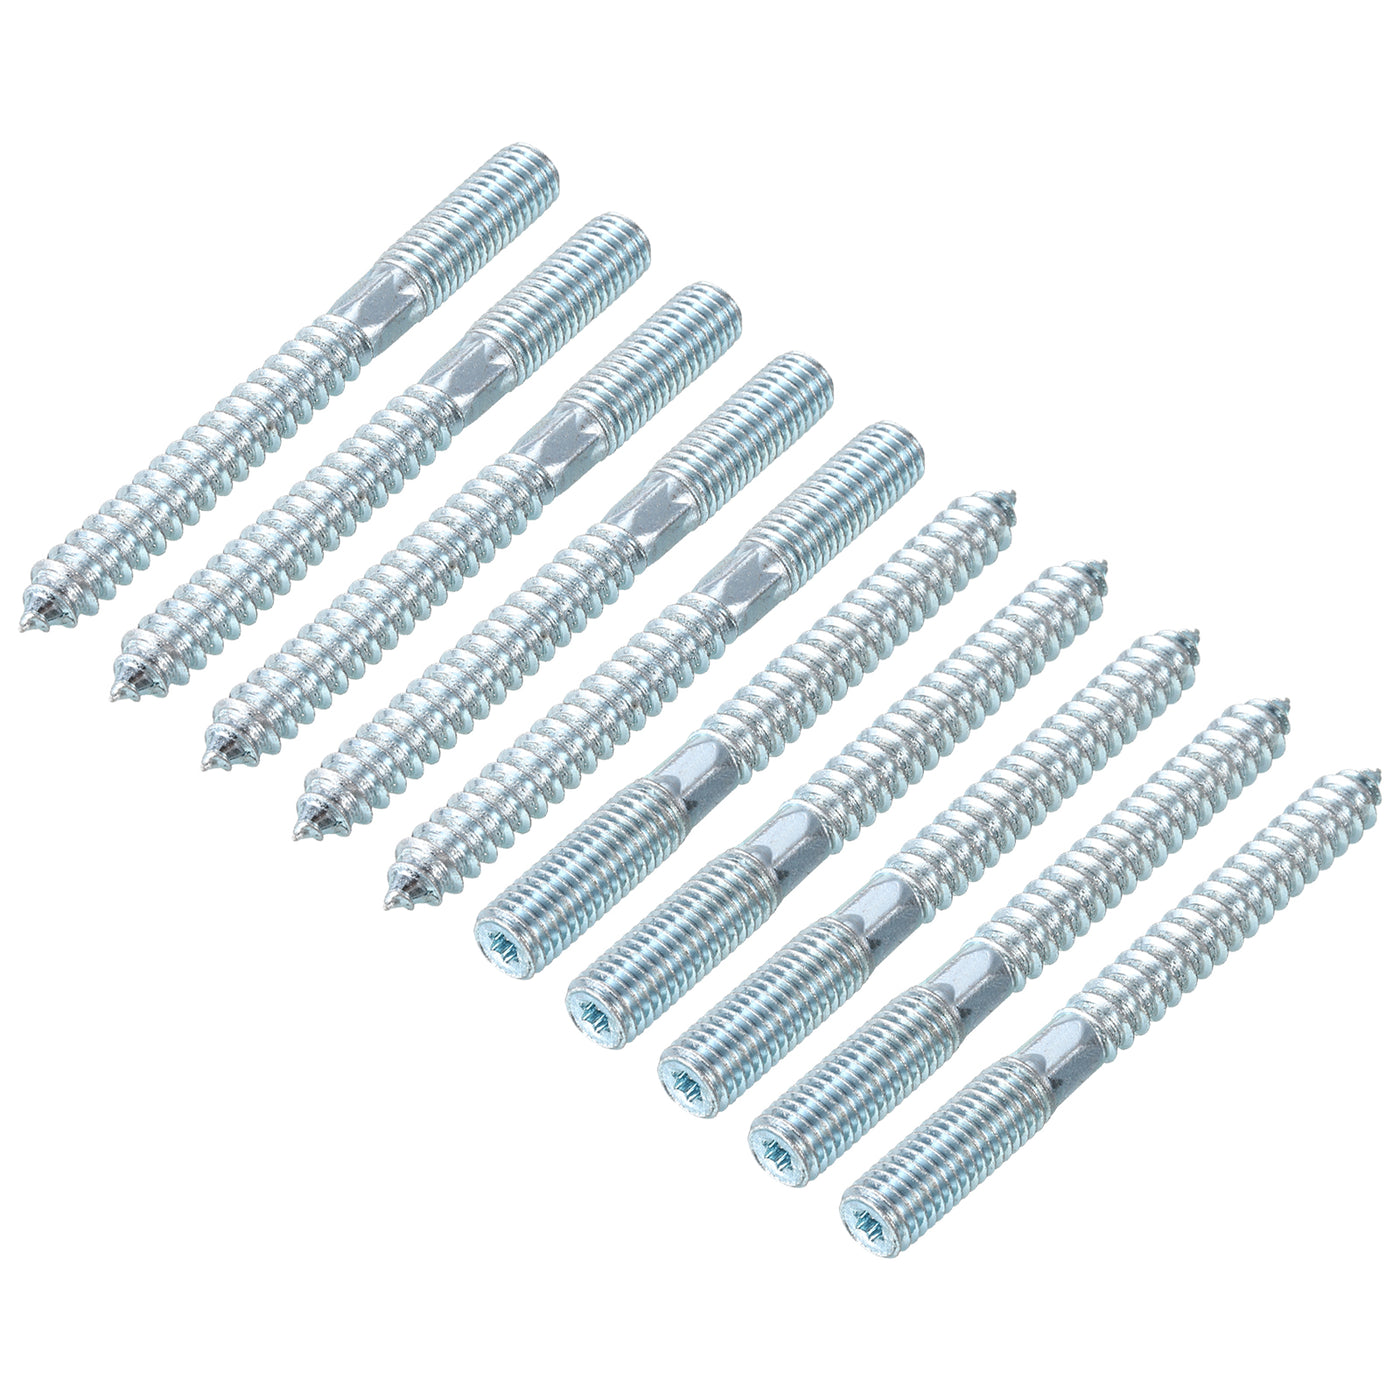 uxcell Uxcell 16Pcs M10x100mm Hanger Bolt Double Headed Bolt Self-Tapping Screw for Furniture